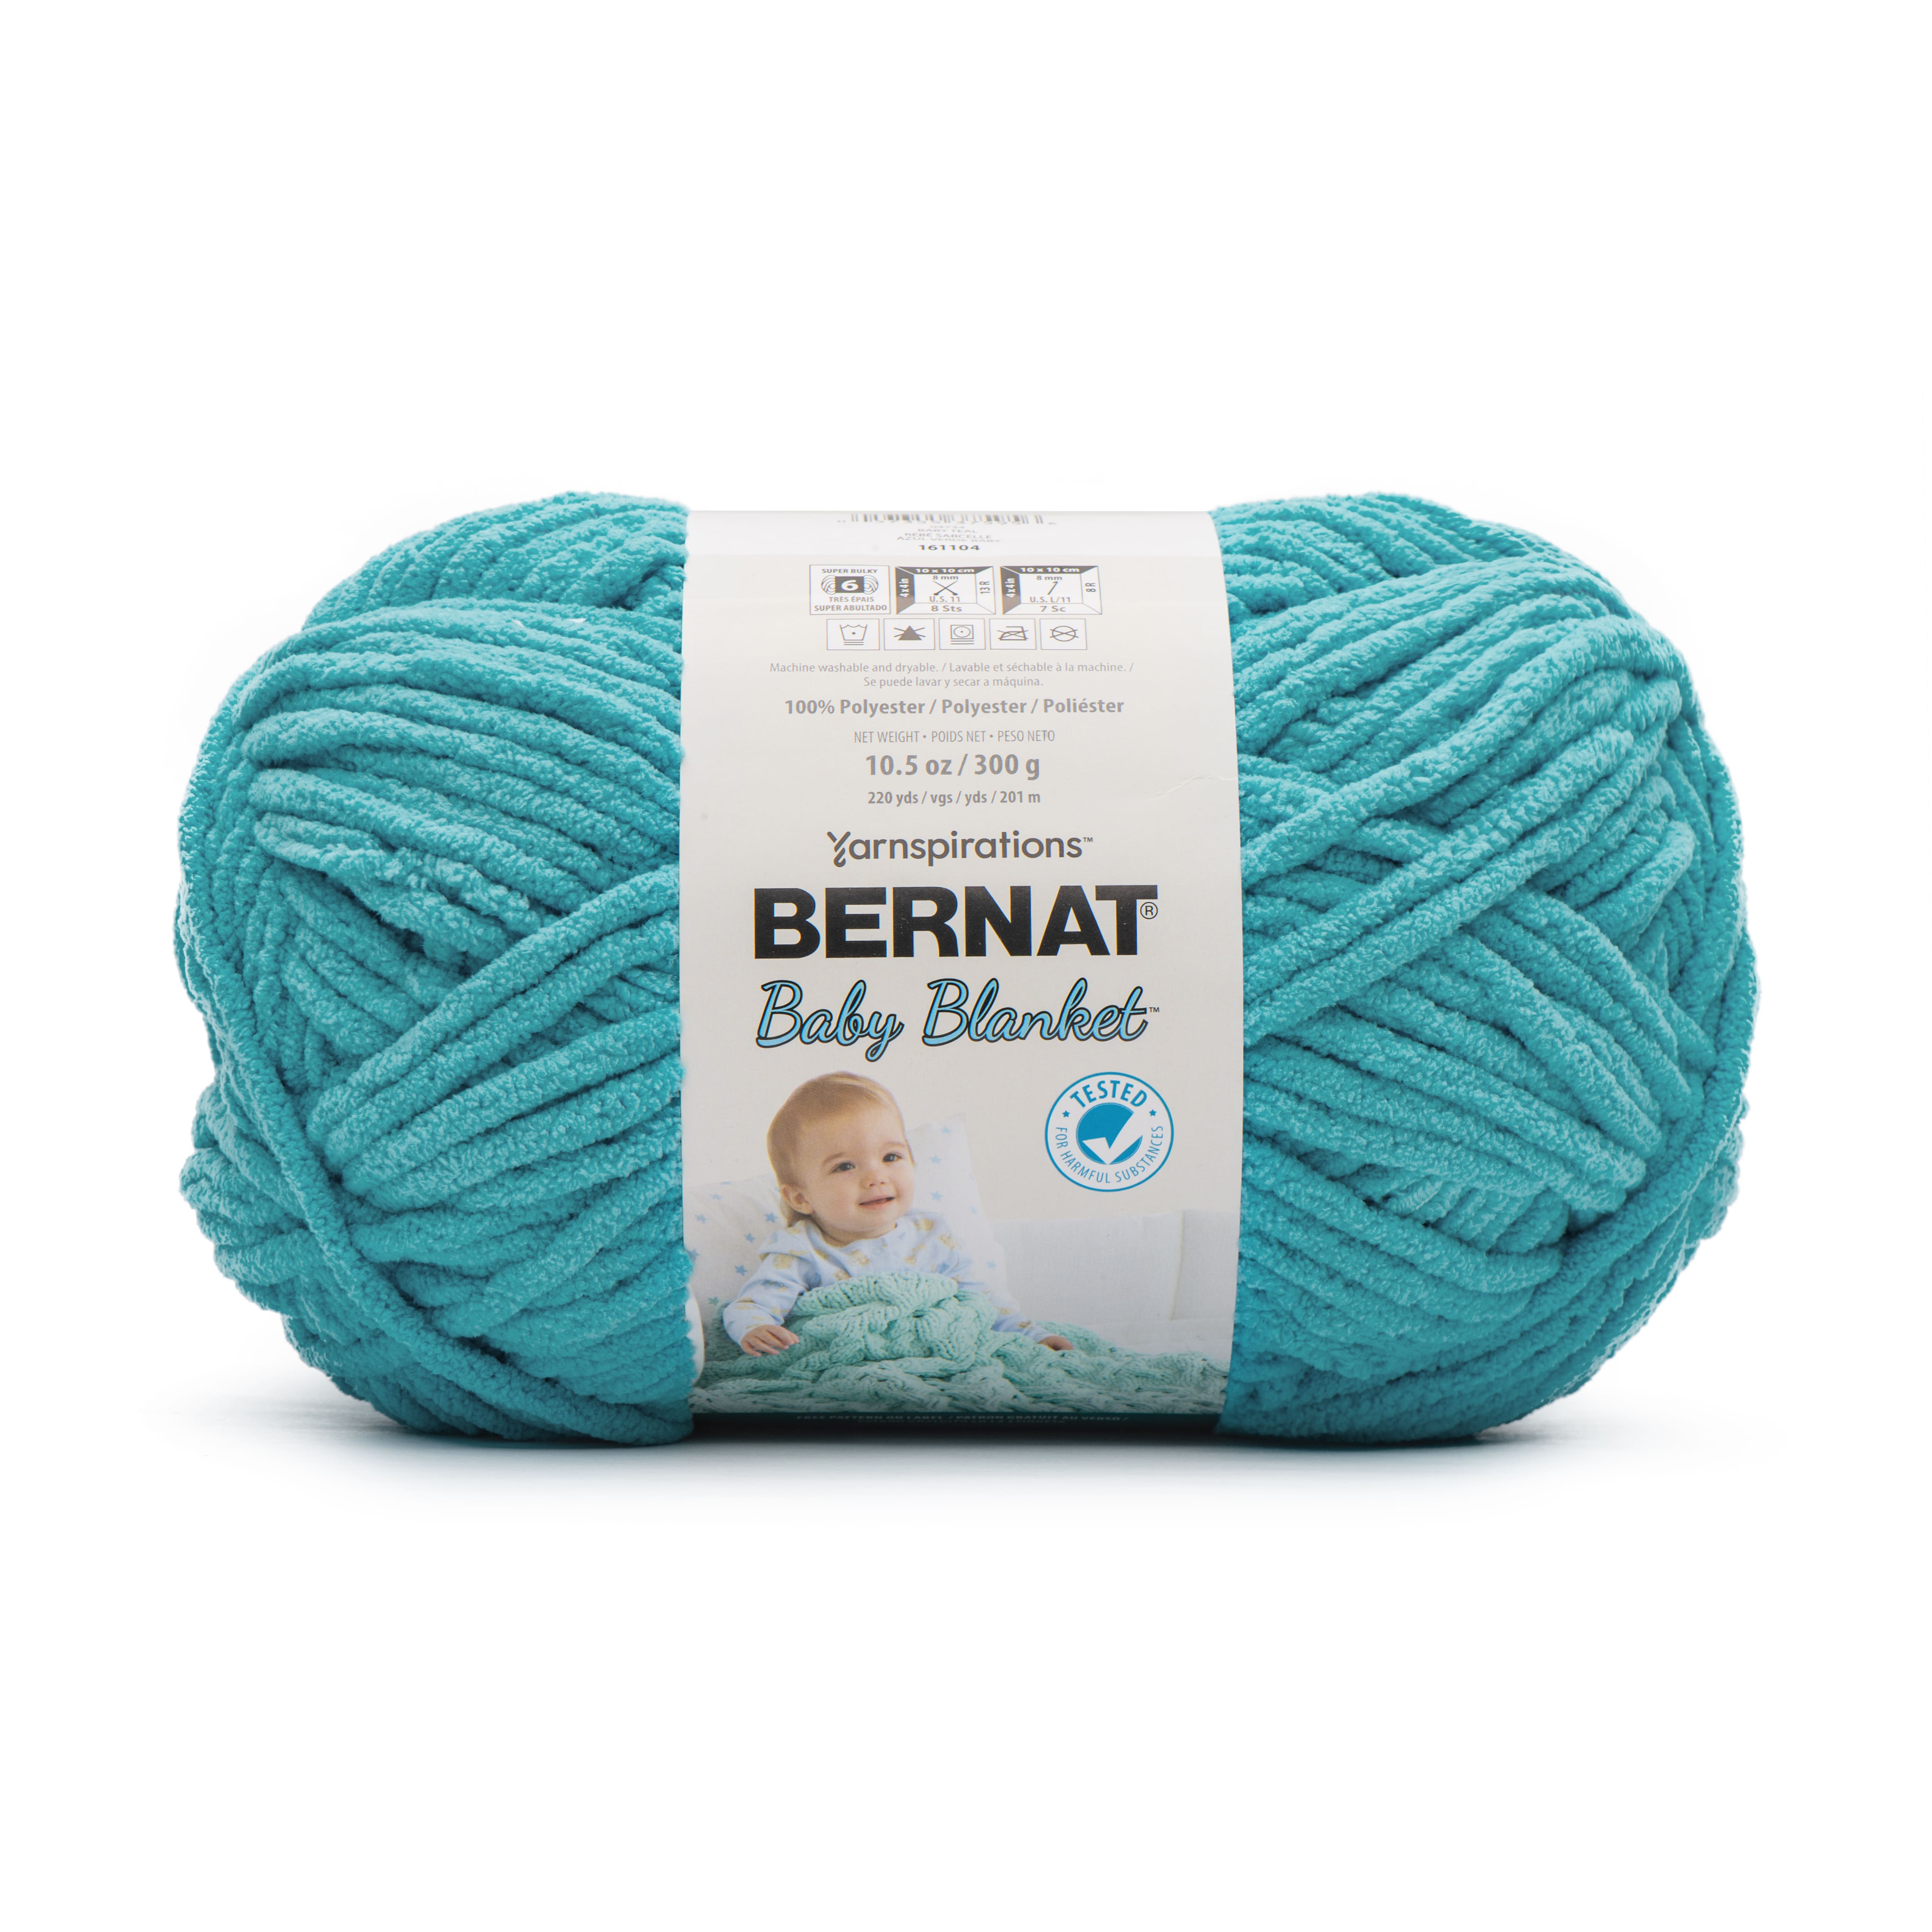 What Is The Best Yarn For A Baby Blanket?